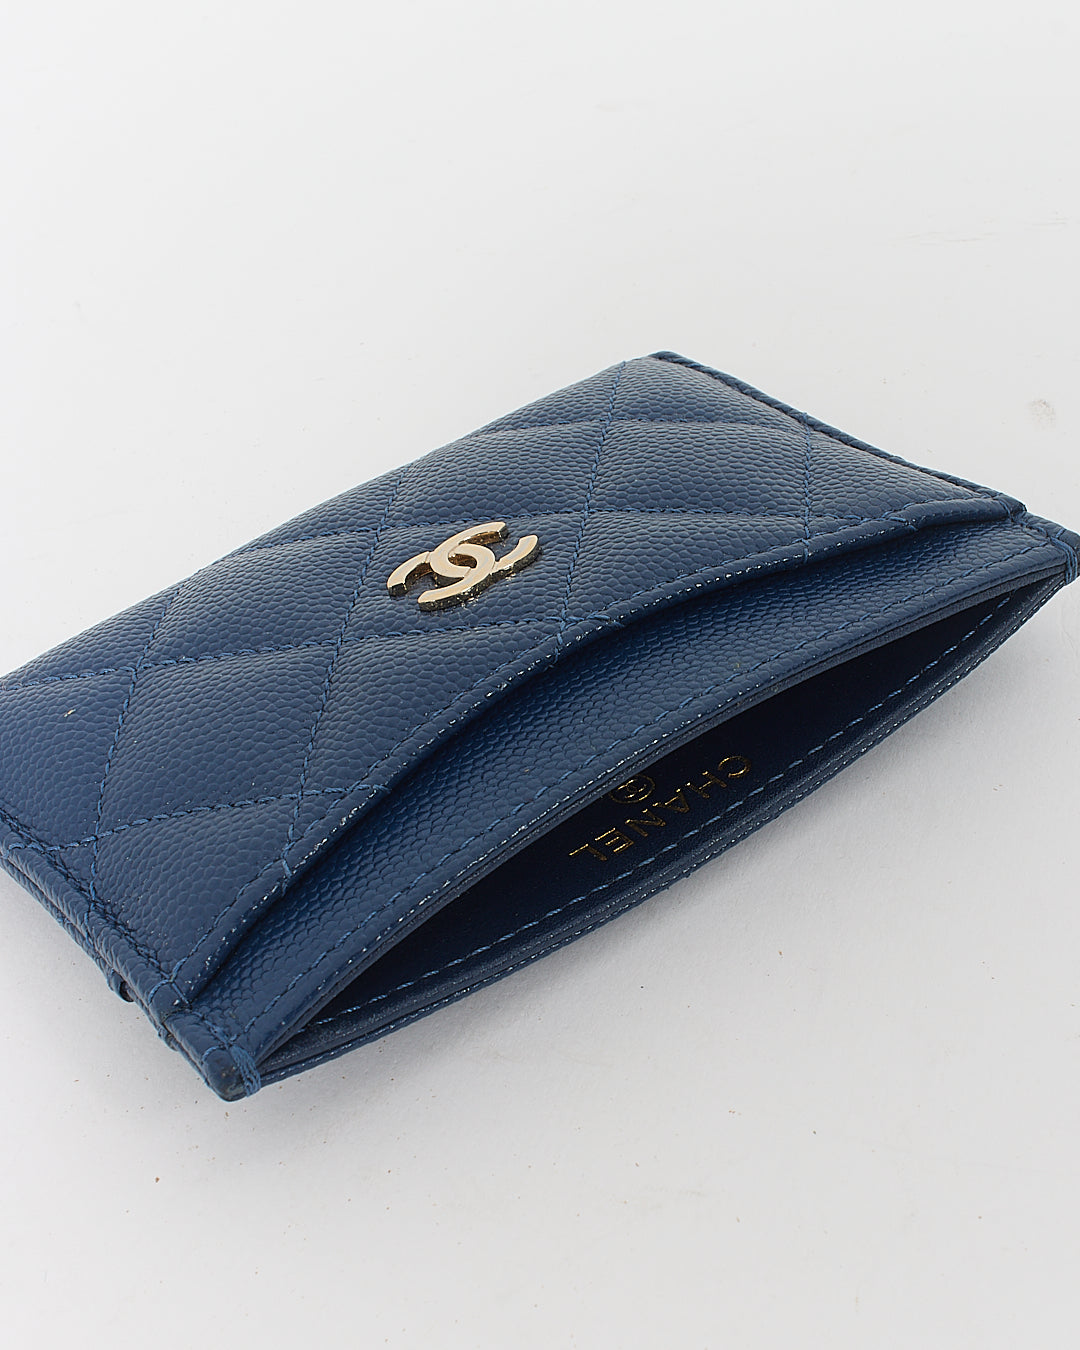 Chanel Navy Blue Caviar Leather Card Holder